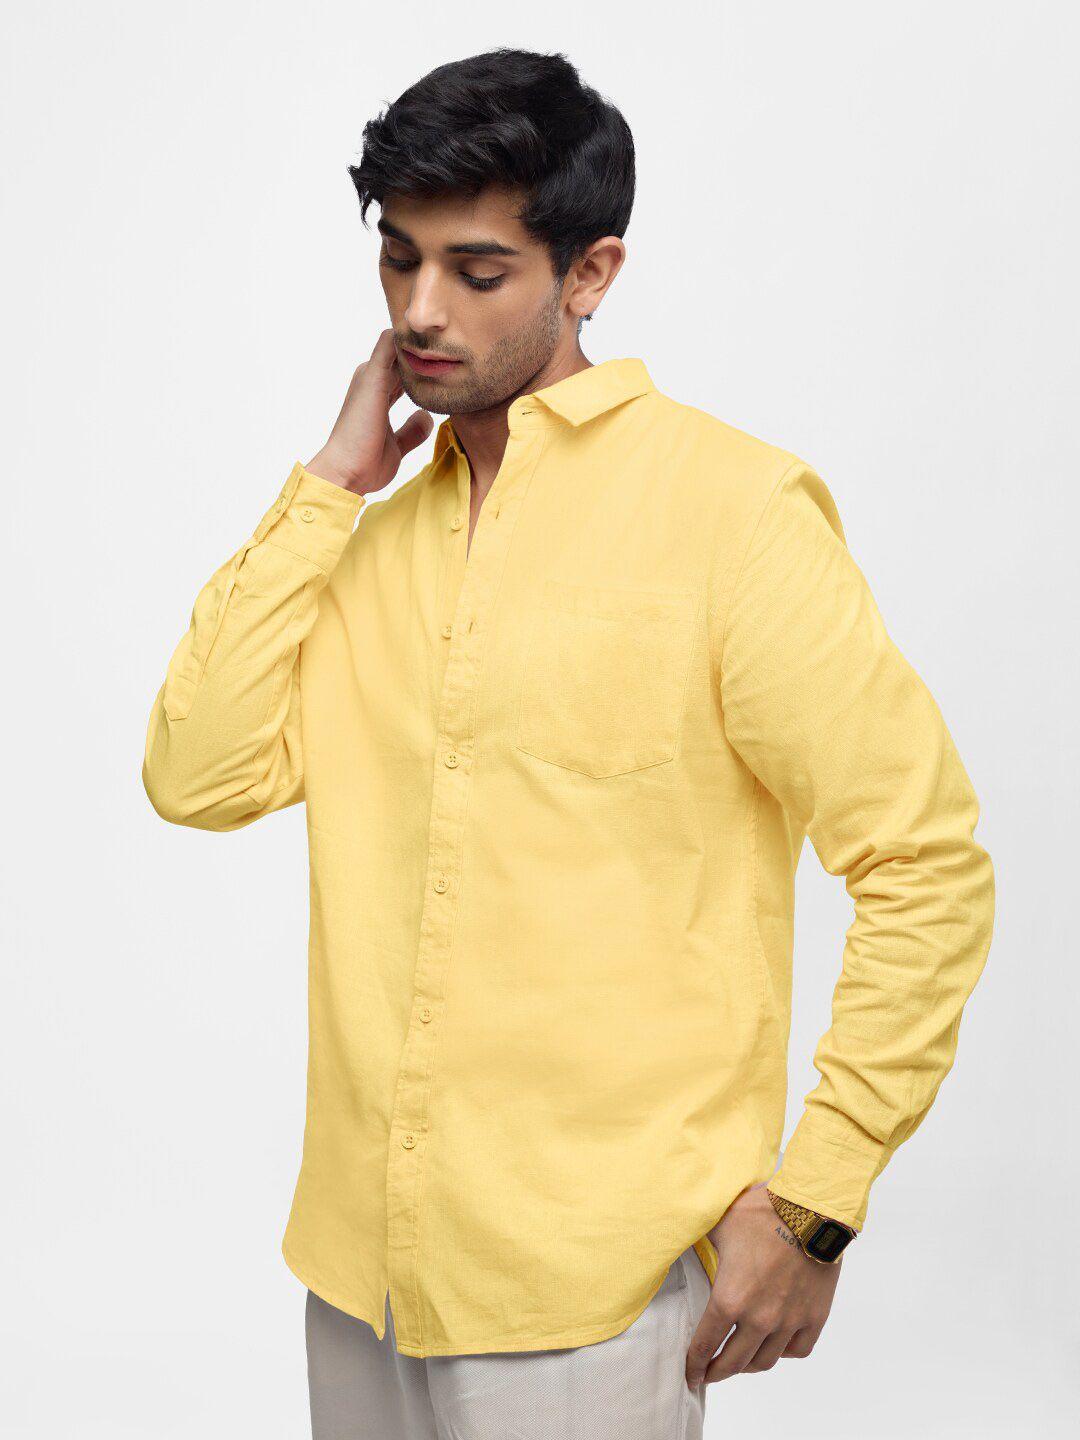 the souled store relaxed pure cotton casual shirt